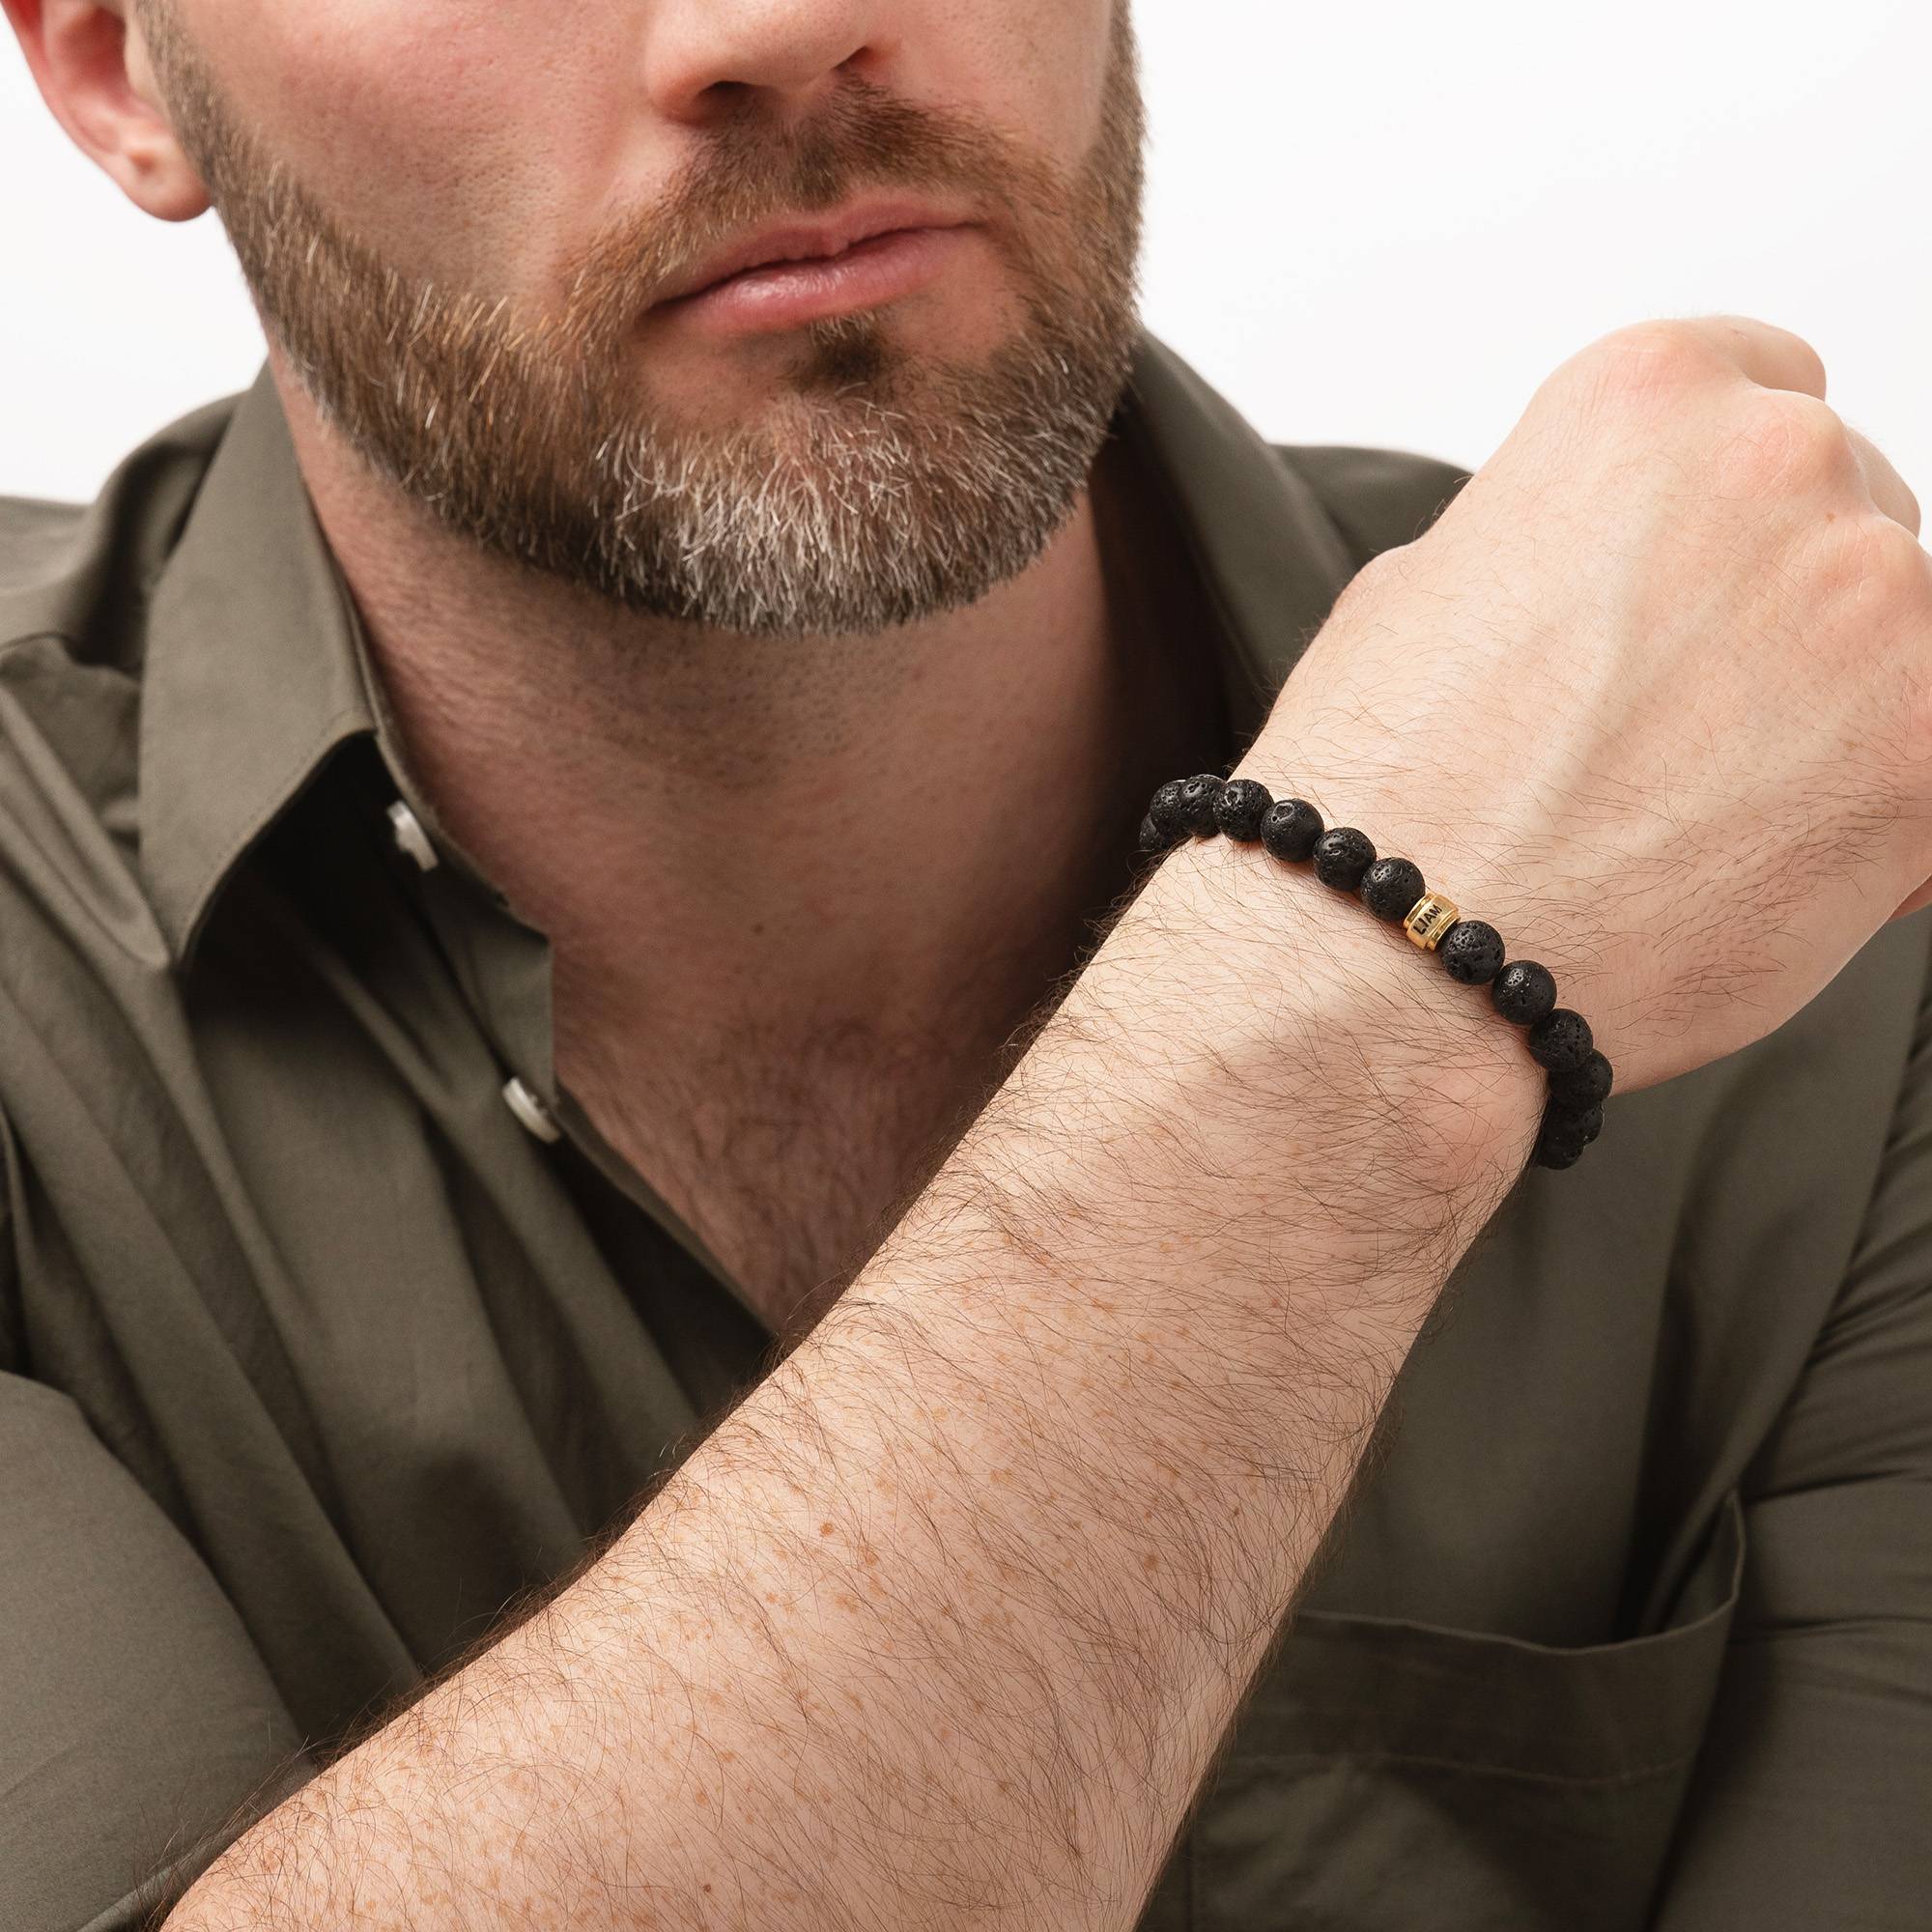 Leo Personalized Lava Bracelet for Men with 18ct Gold Vermeil Beads-2 product photo